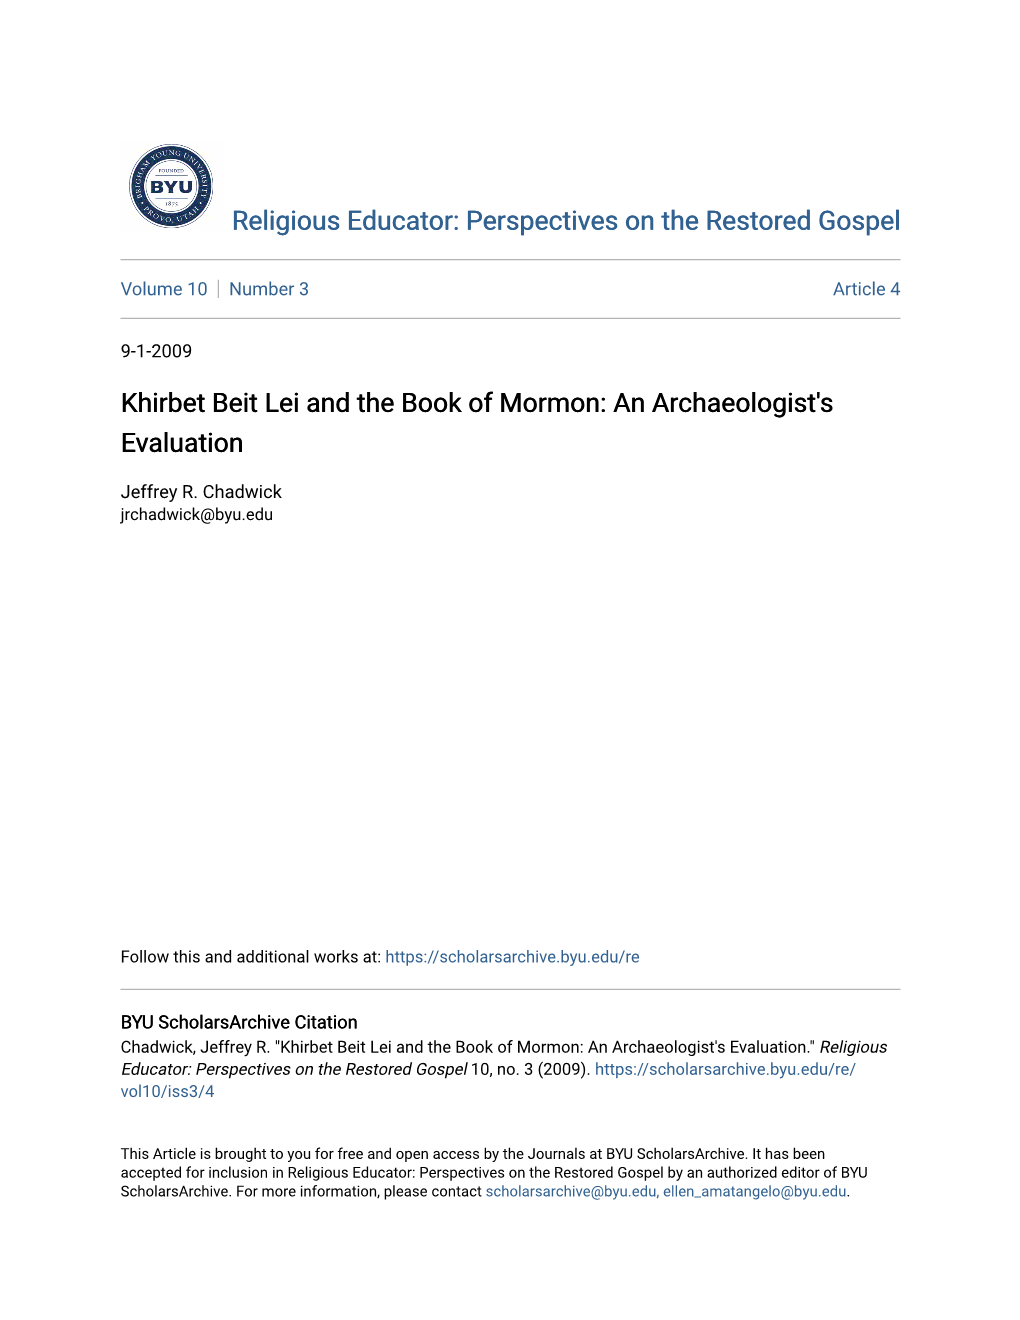 Khirbet Beit Lei and the Book of Mormon: an Archaeologist's Evaluation